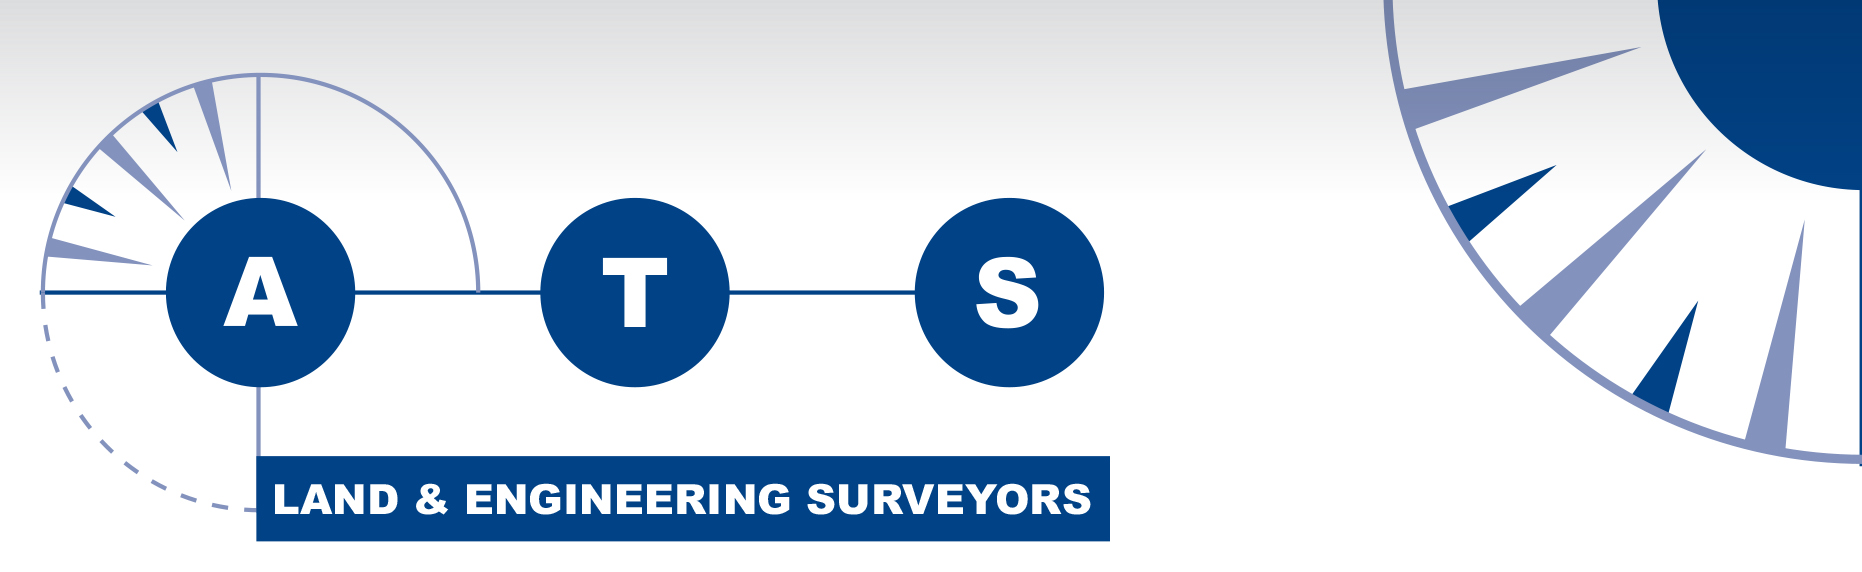 A.T.S. LAND & ENGINEERING SURVEYORS – COMMERCIAL & RESIDENTIAL